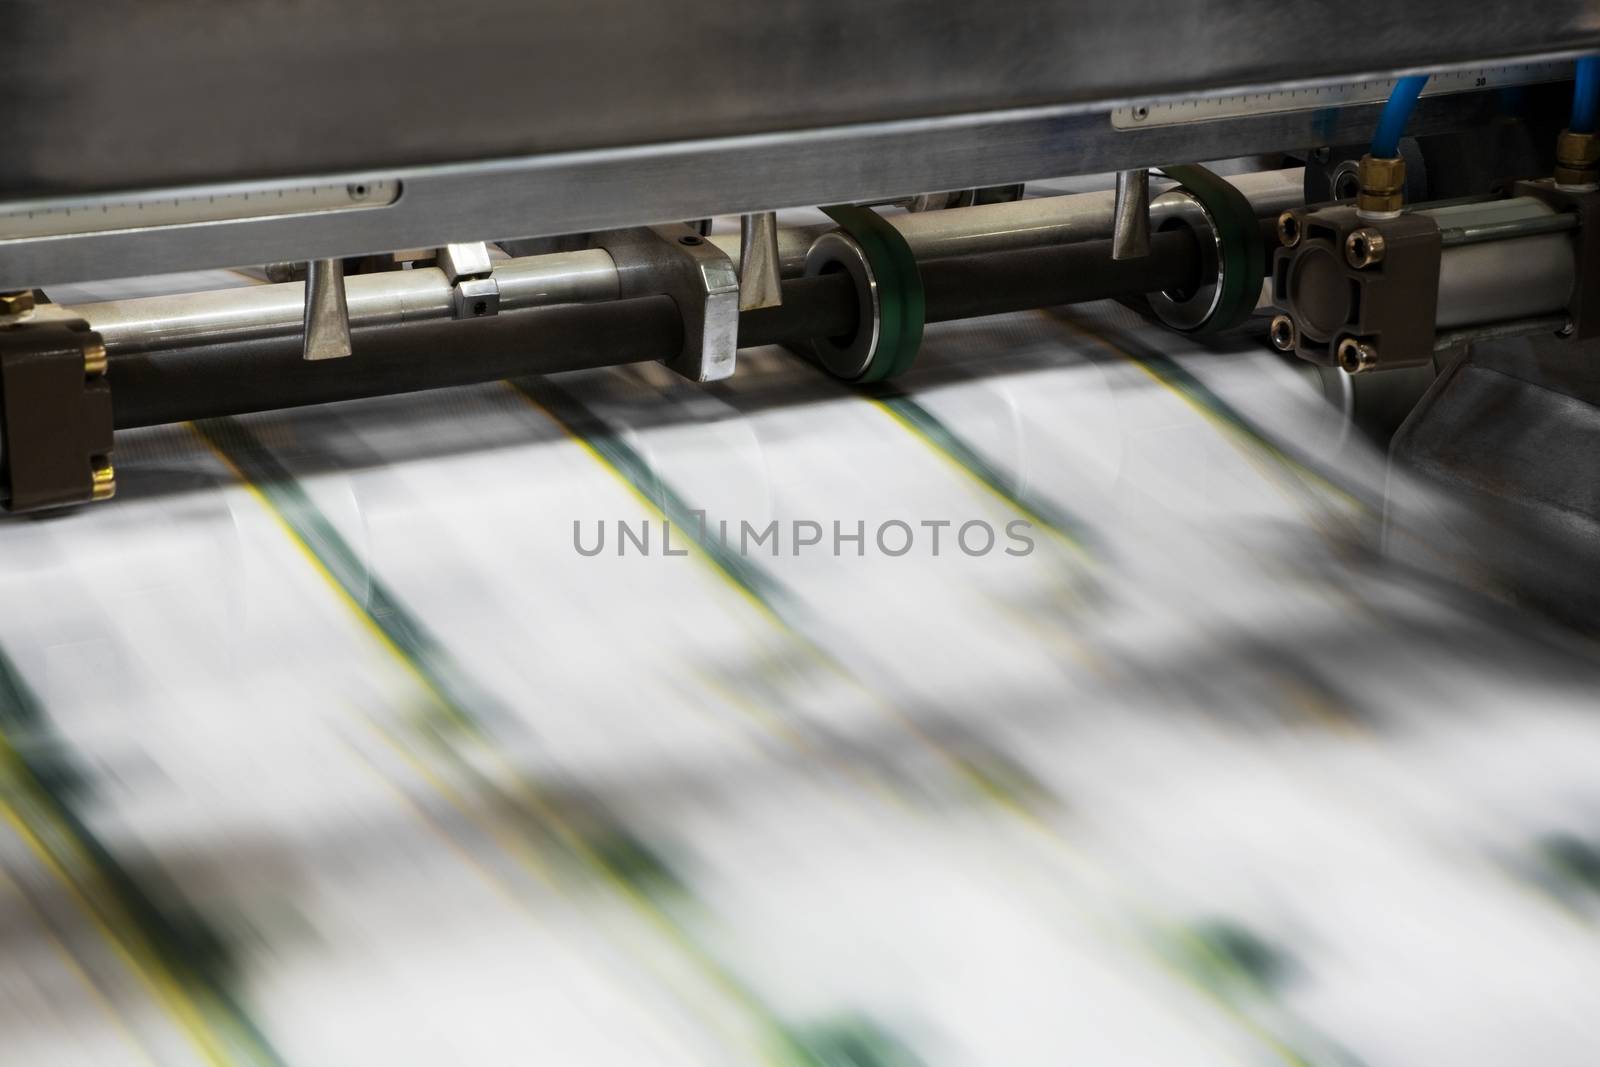 Polygraphic process in a modern printing house